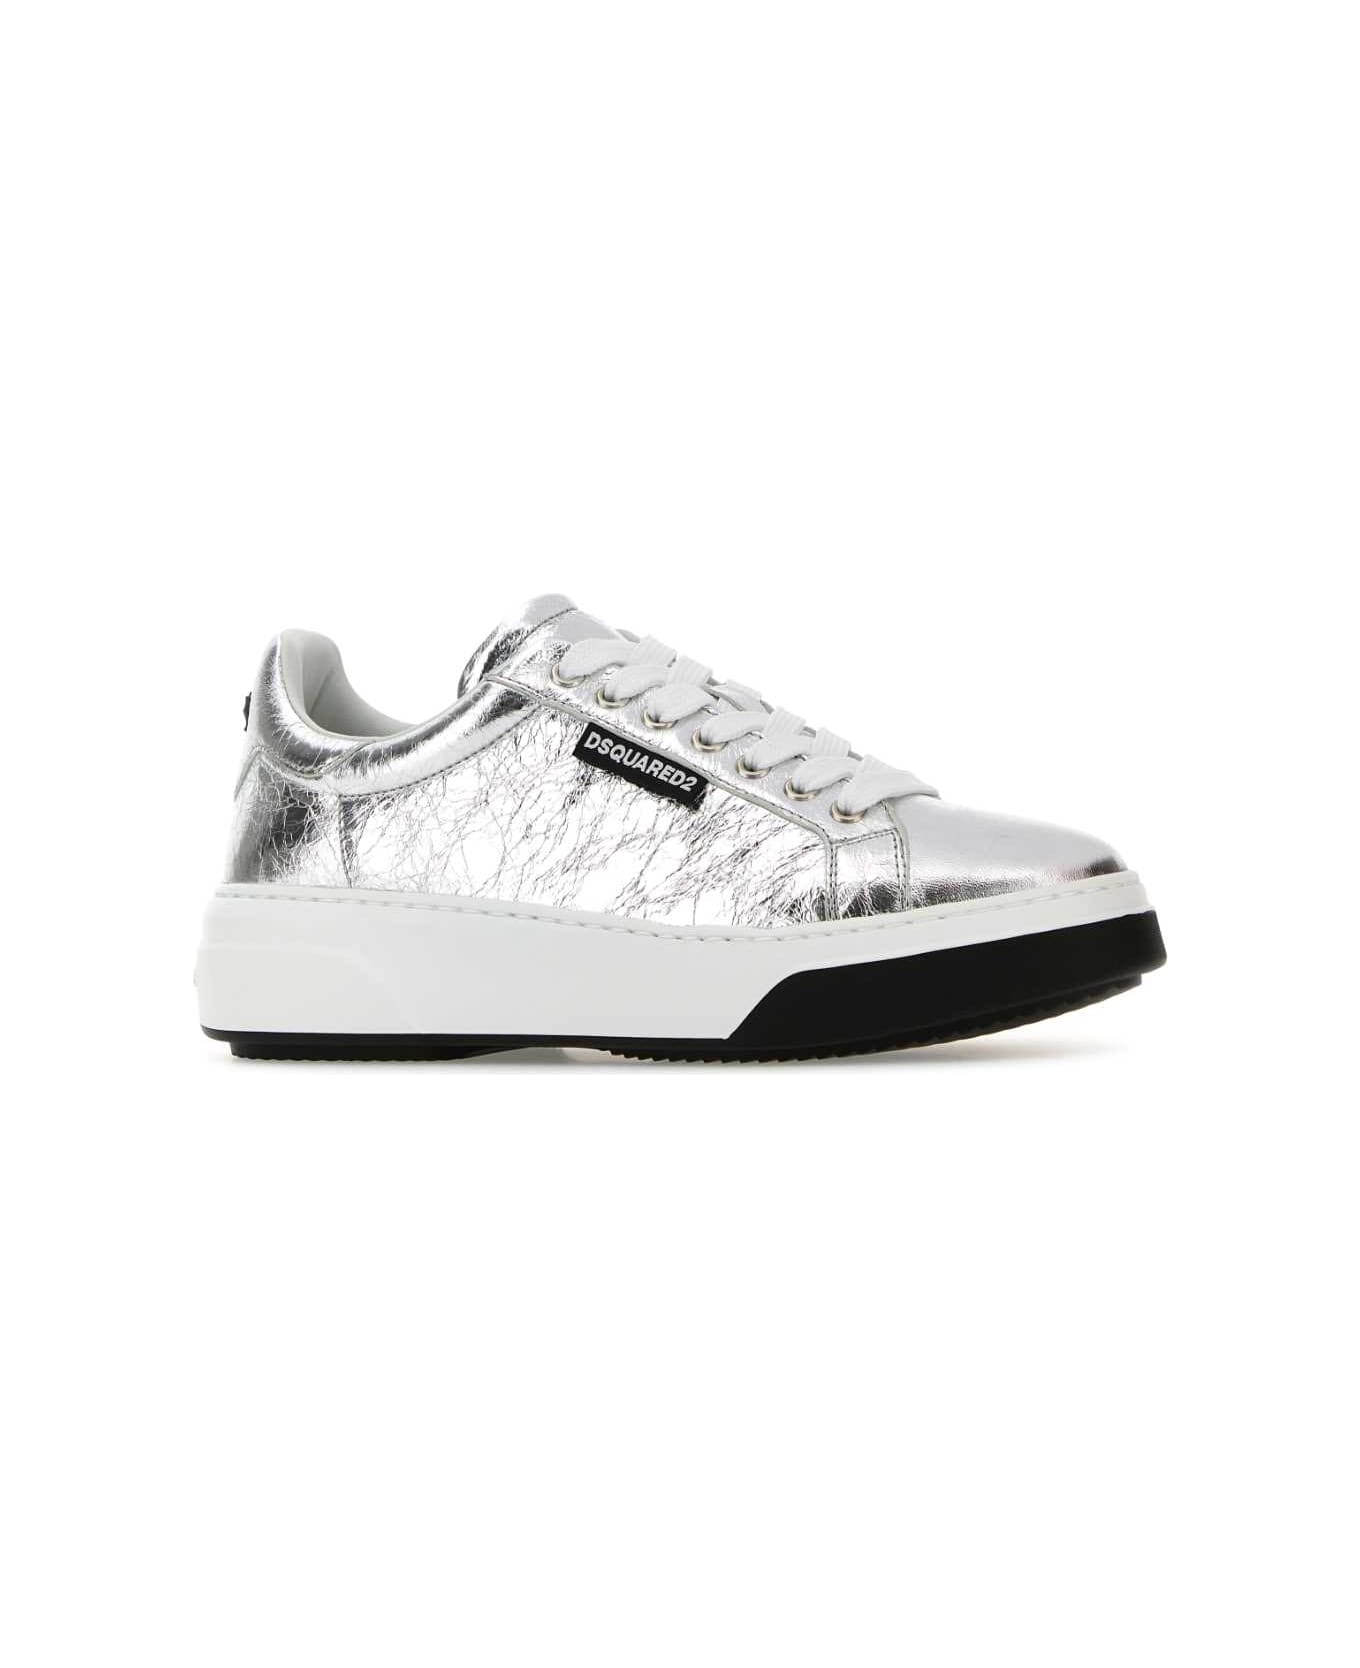 Dsquared2 Bumper Sneakers - ARGENTO スニーカー